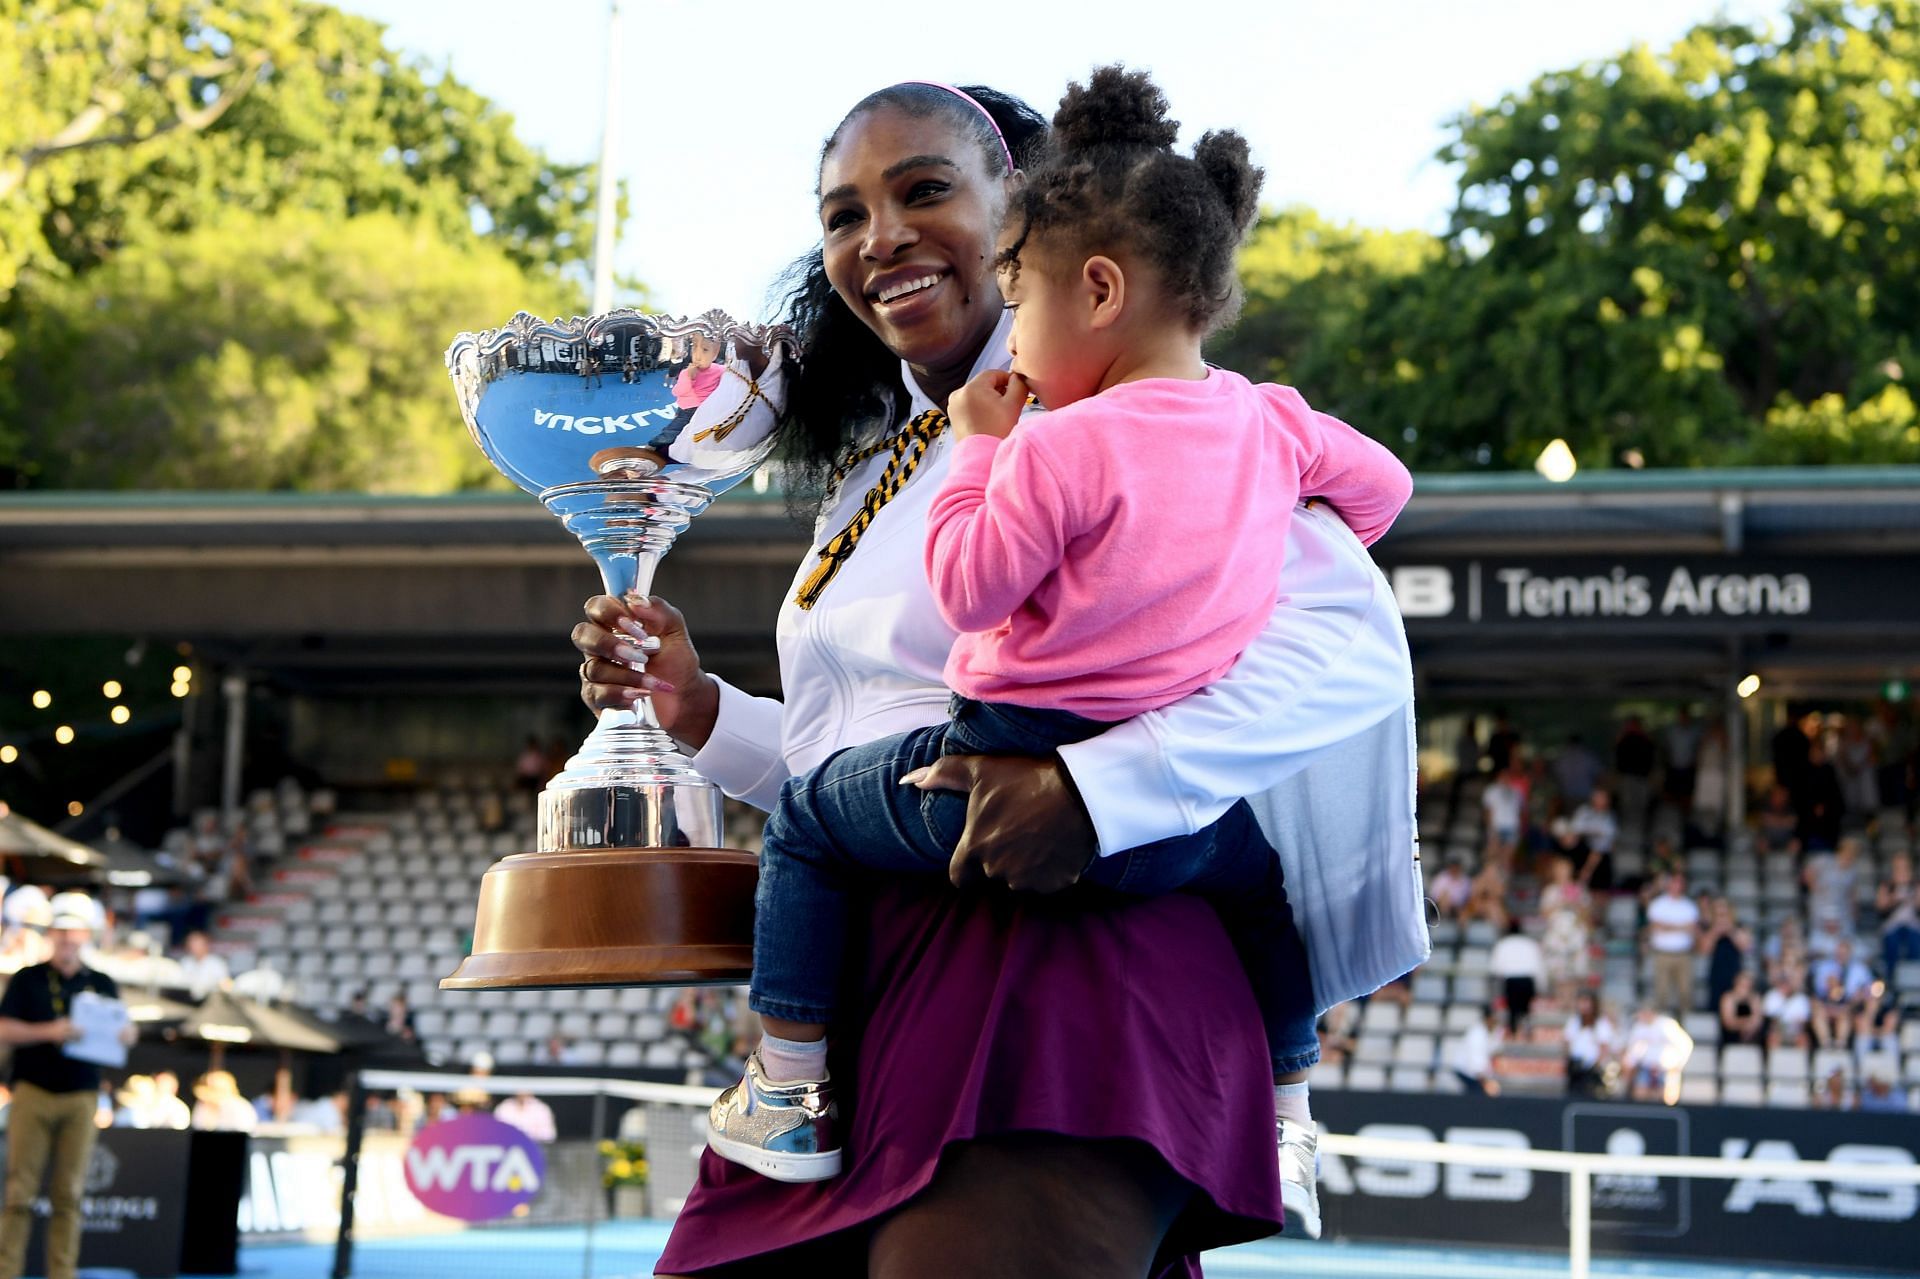 Serena Williams said that her daughter can play tennis but others of her age can defeat her